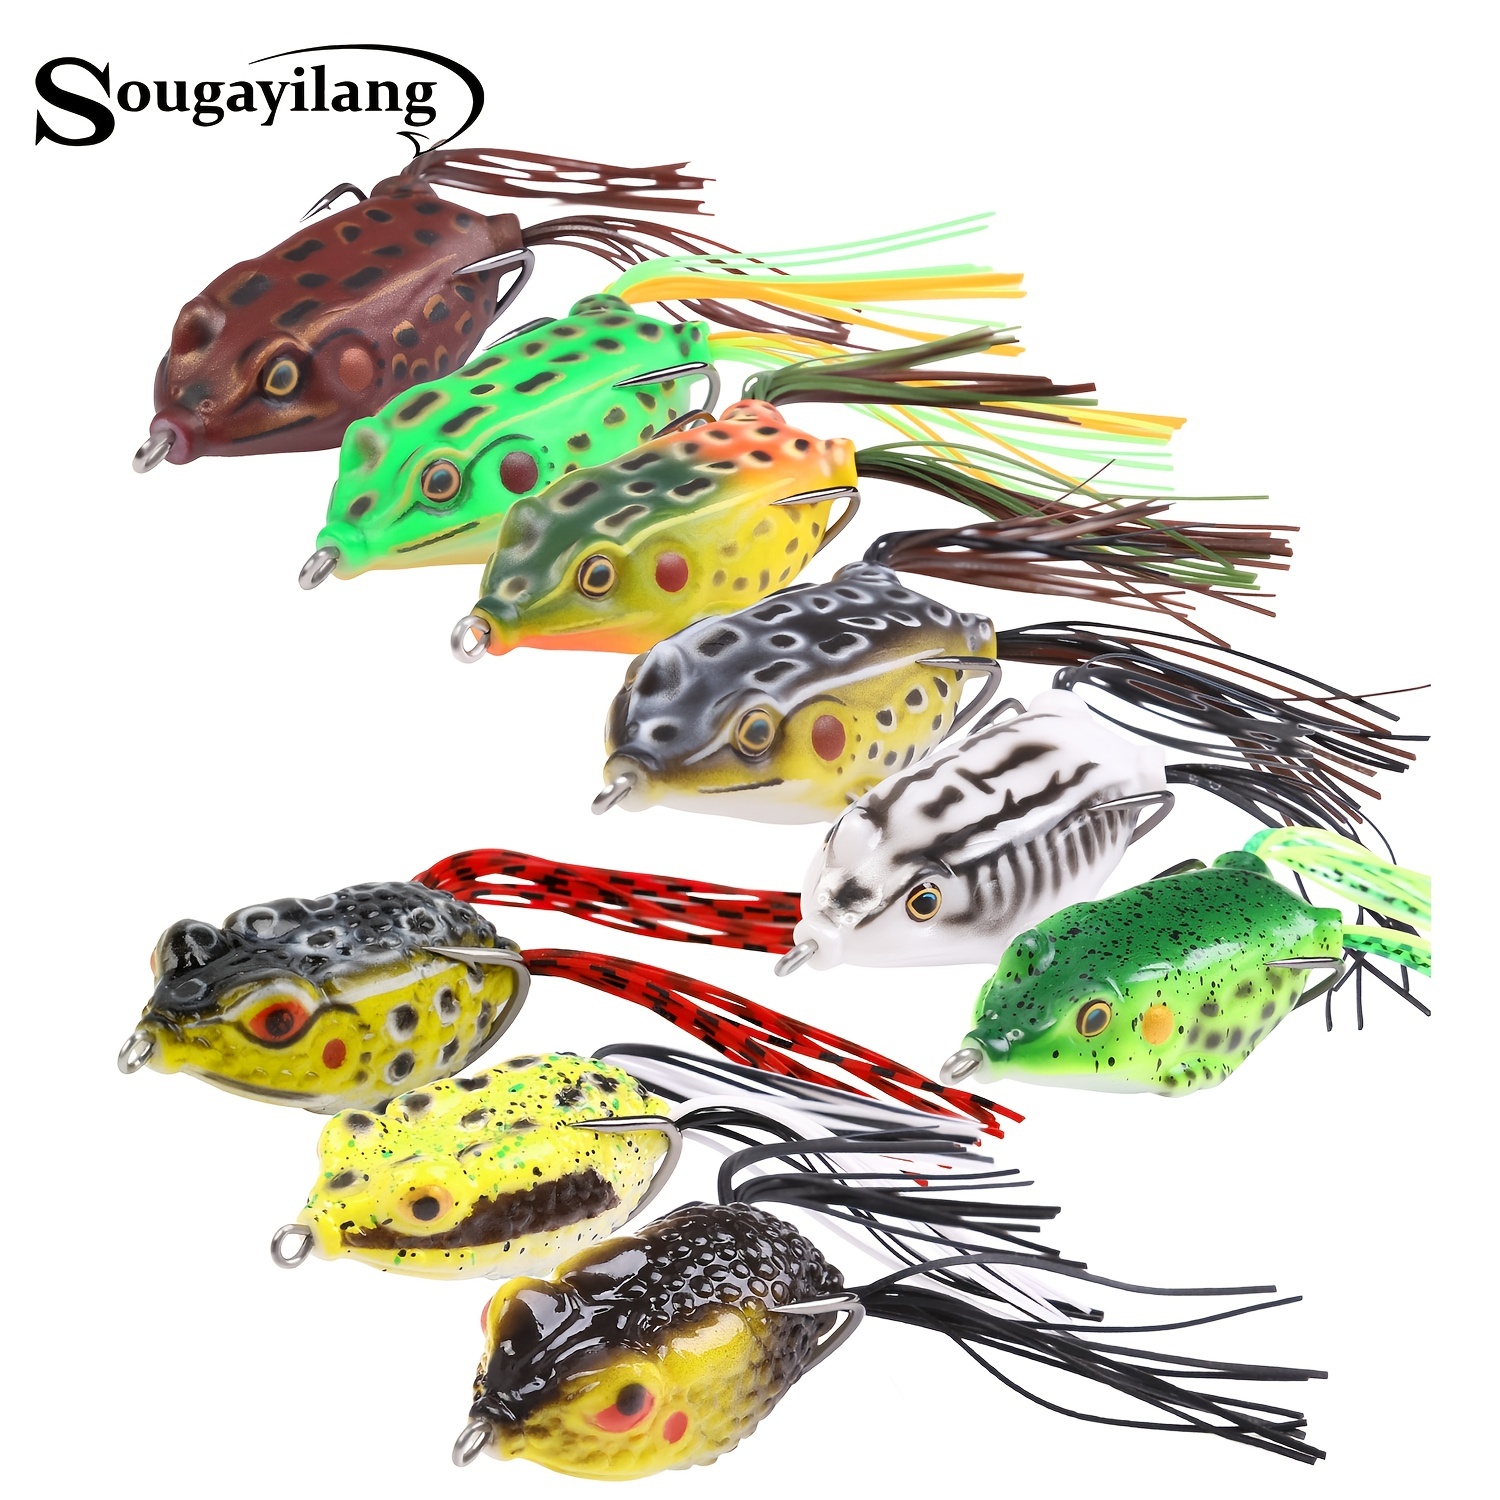 Silicone frog - top water bait for pike or large mouth bass